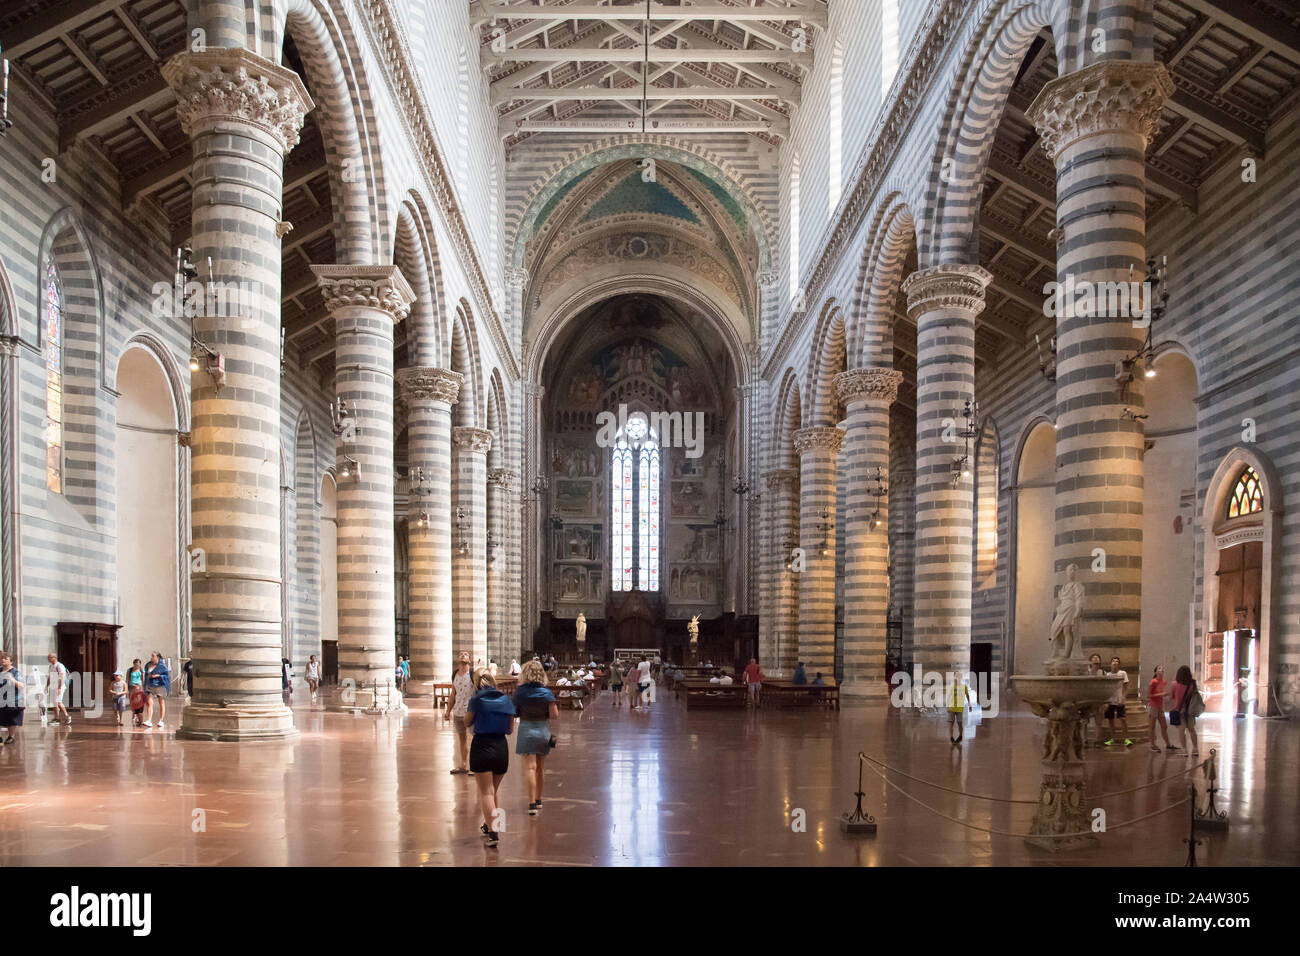 Italian Gothic Cattedrale di Santa Maria Assunta (Cathedral of Assumption of the Blessed Virgin Mary) in historic centre of Orvieto, Umbria, Italy. Au Stock Photo